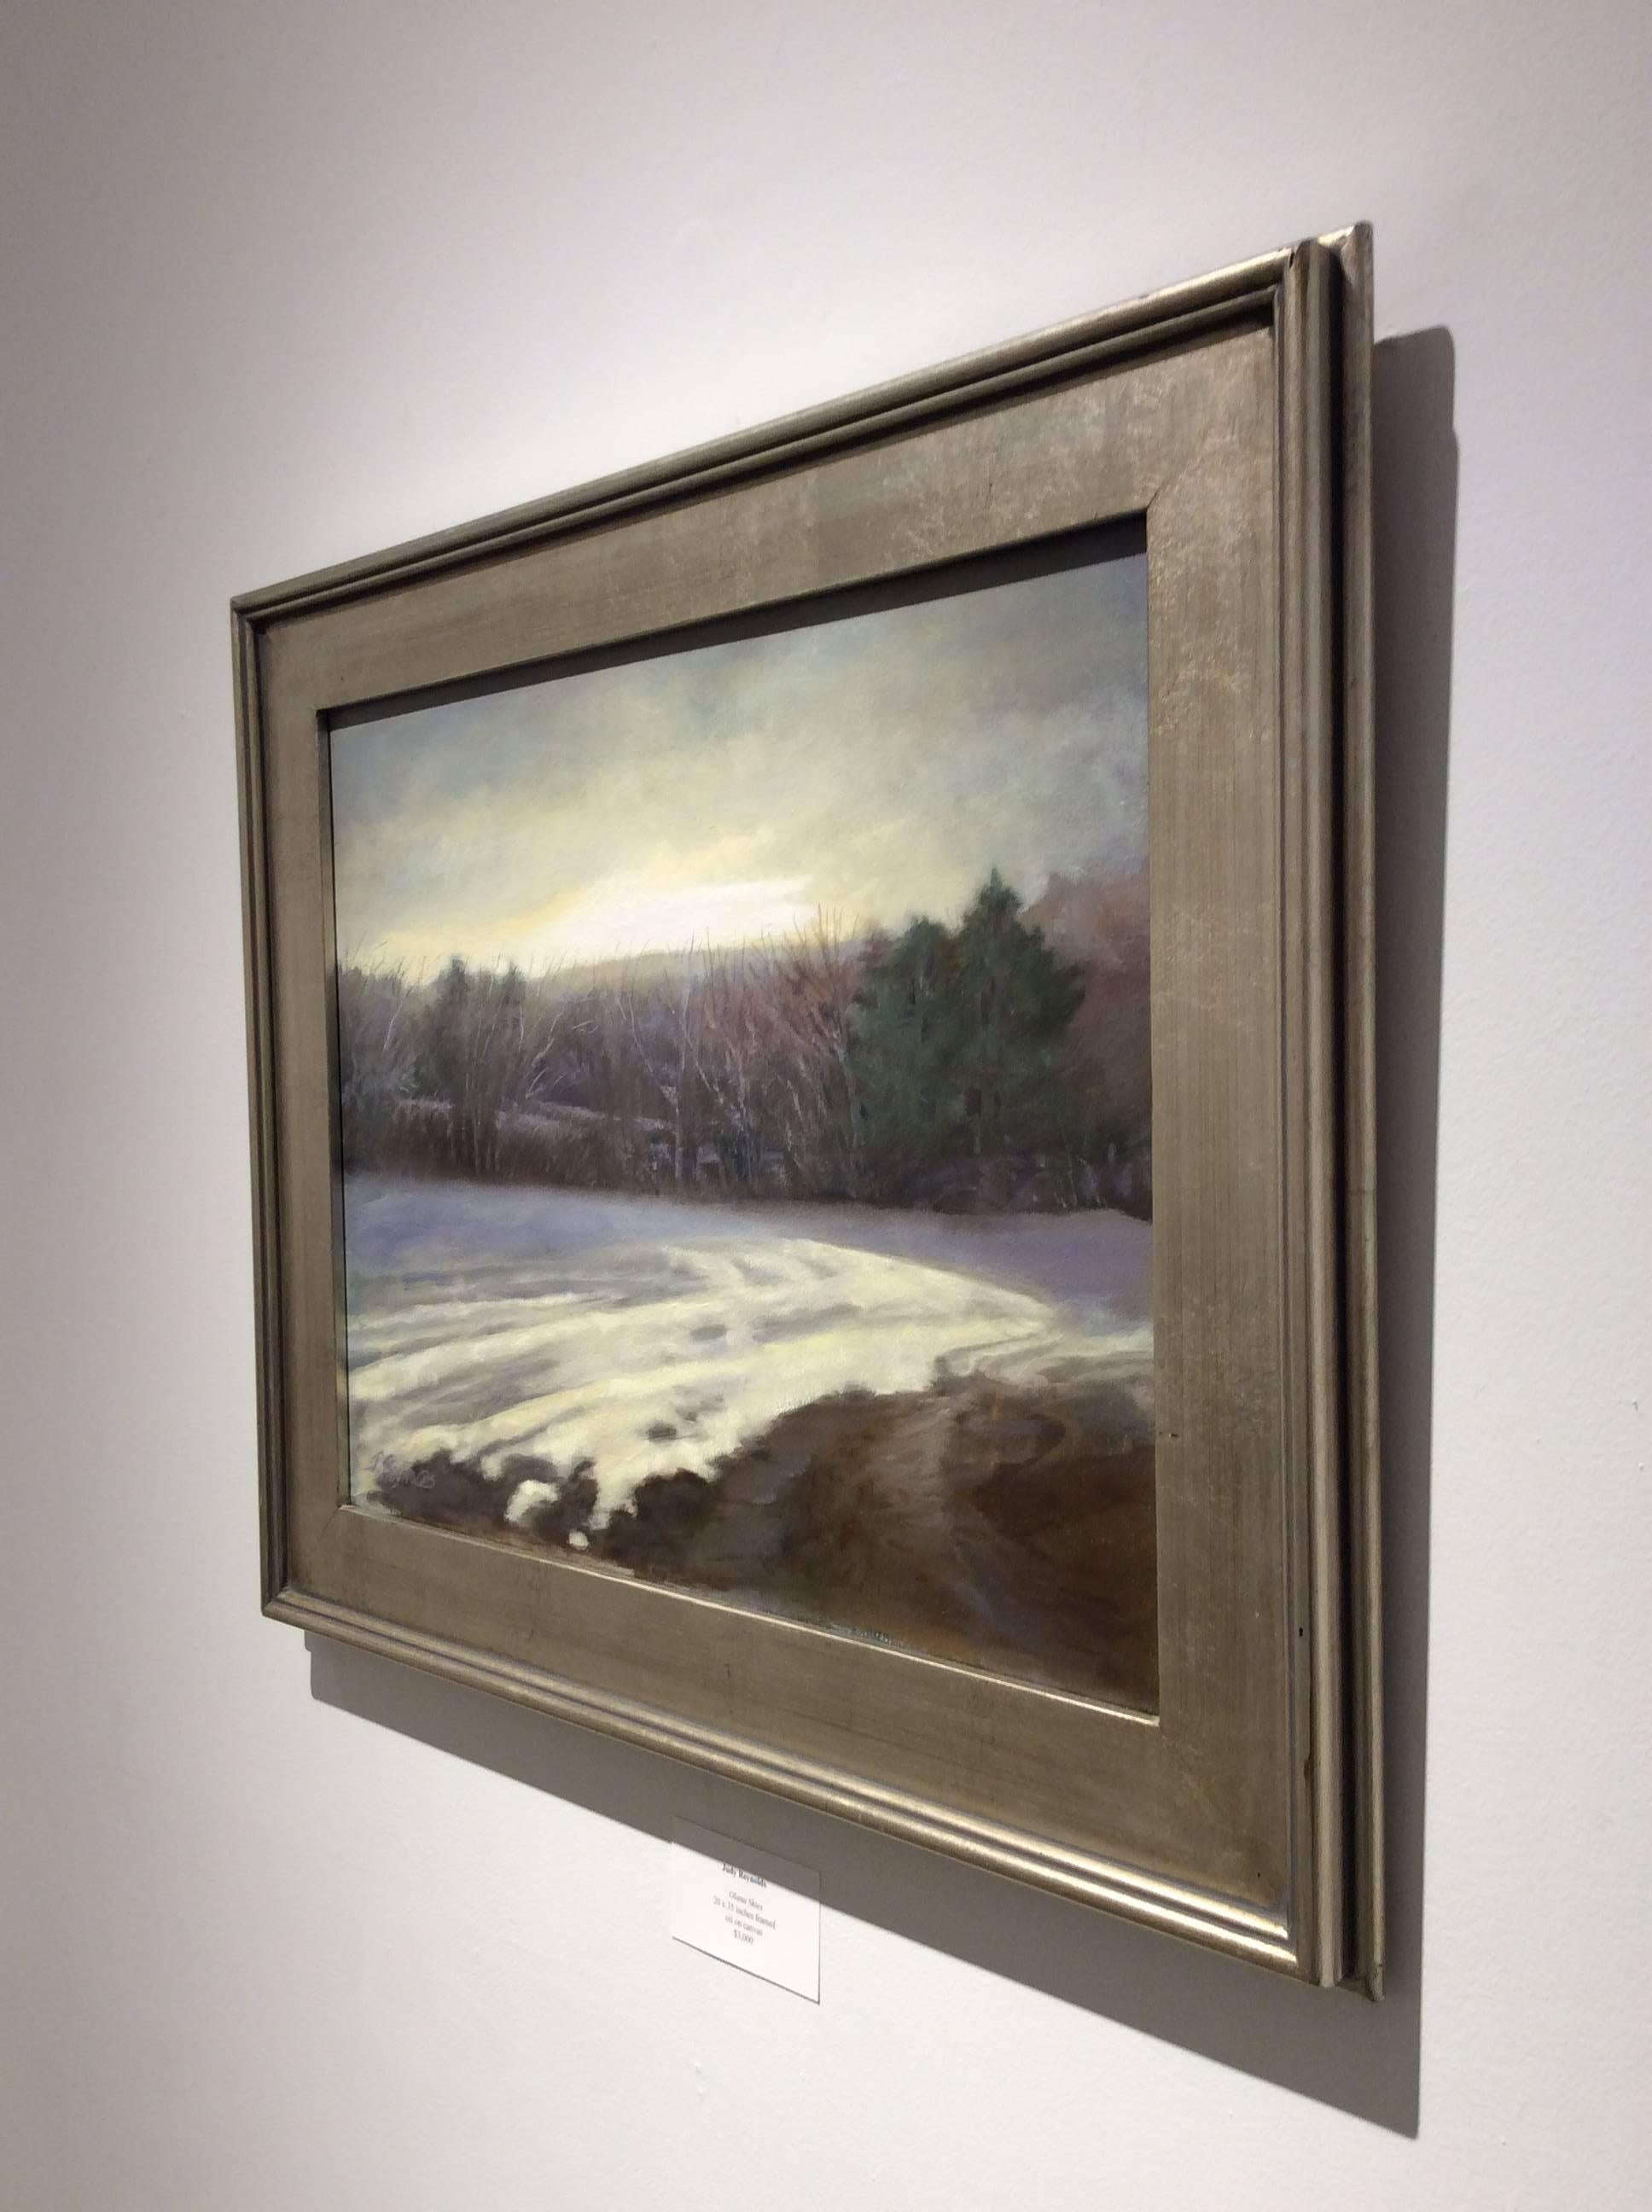 This oil on canvas en plein air landscape painting was painted by Hudson Valley based artist, Judy Reynolds. The composition features a barren corn field in winter layered with creamy white snow. With a palette of delicate yellow, blue, grey, white,